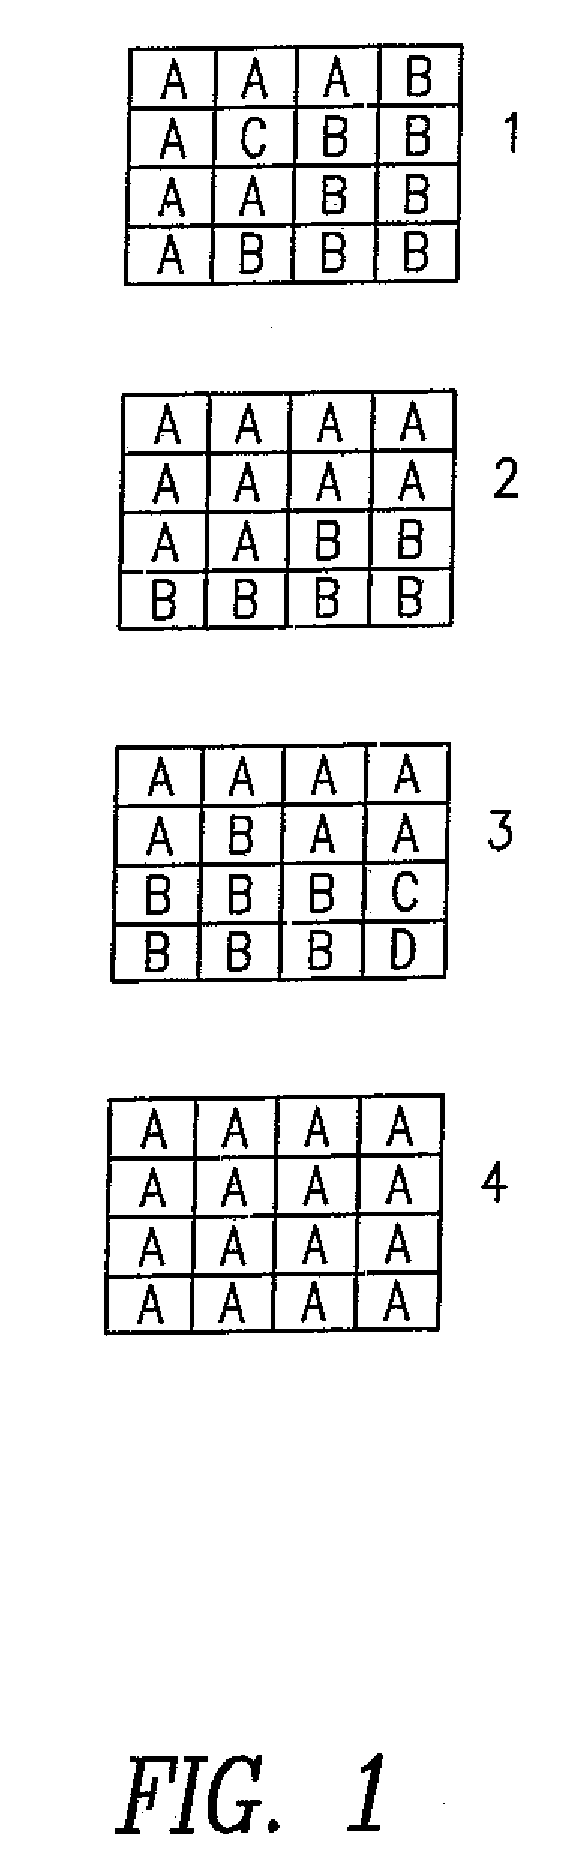 Video compression and encoding method